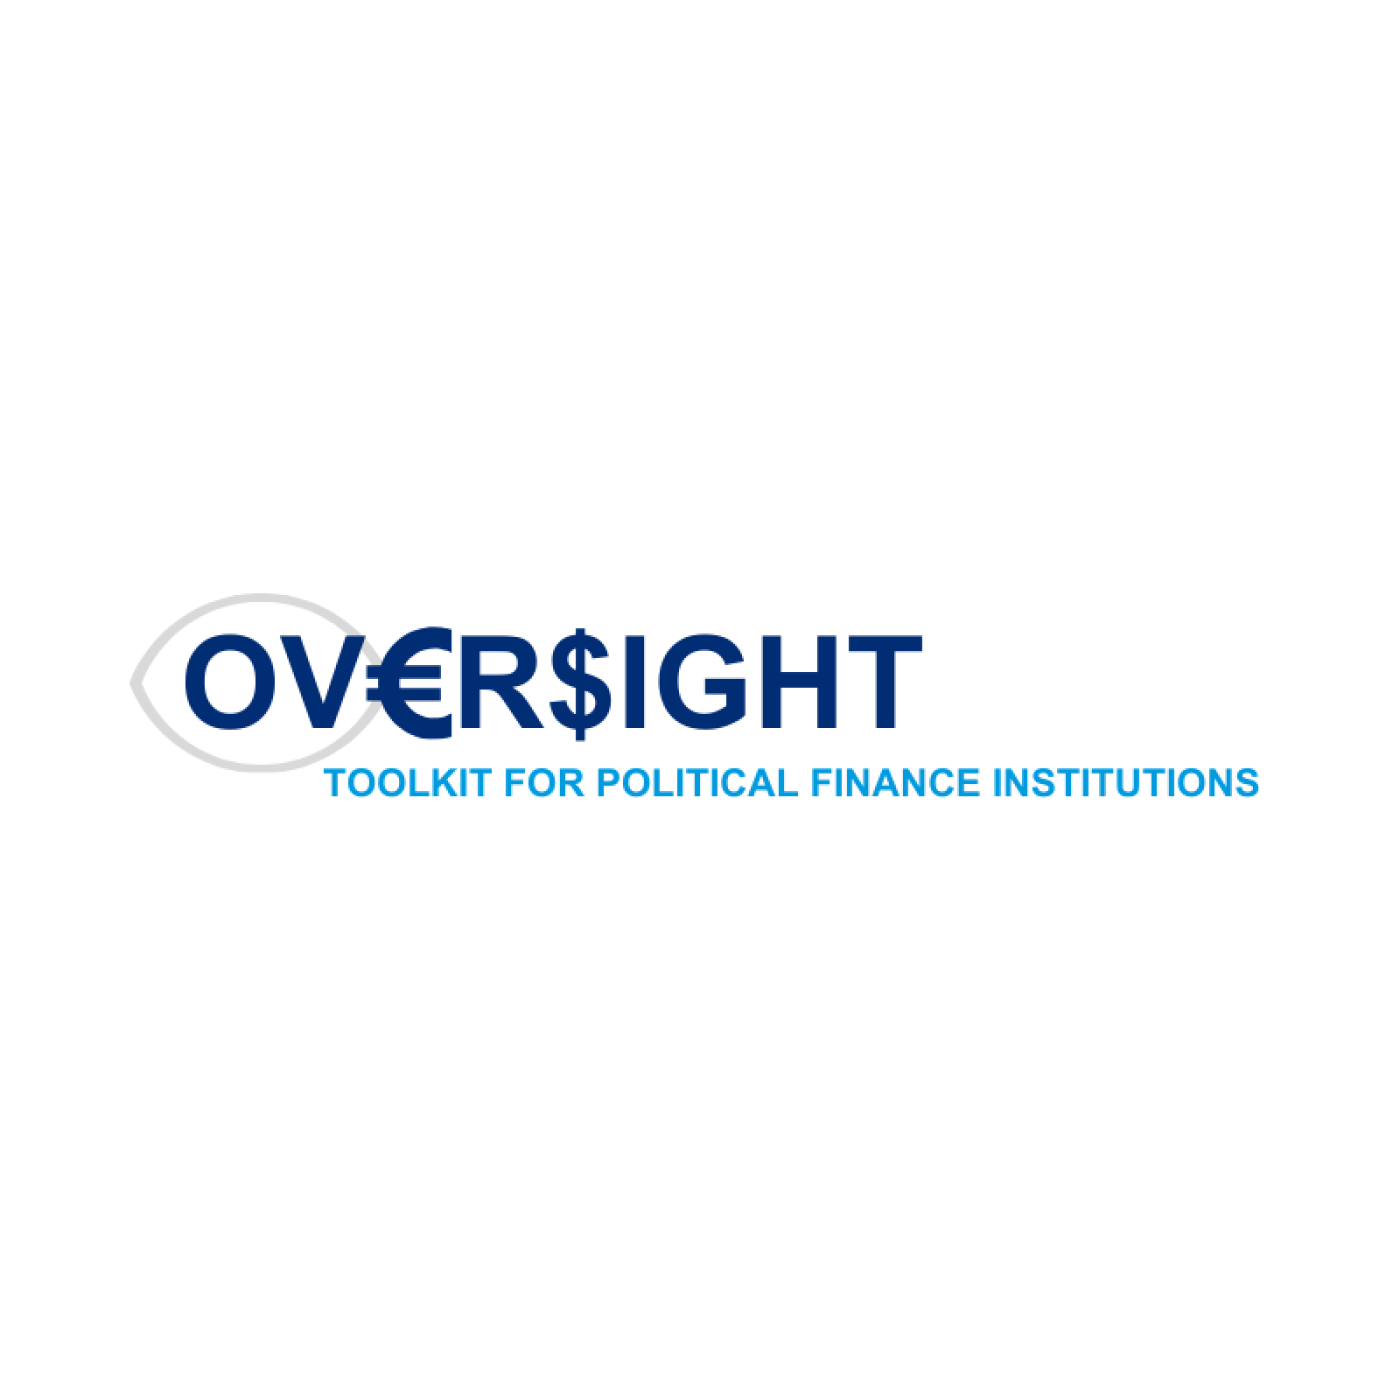 Oversight Toolkit for Political Finance Institutions